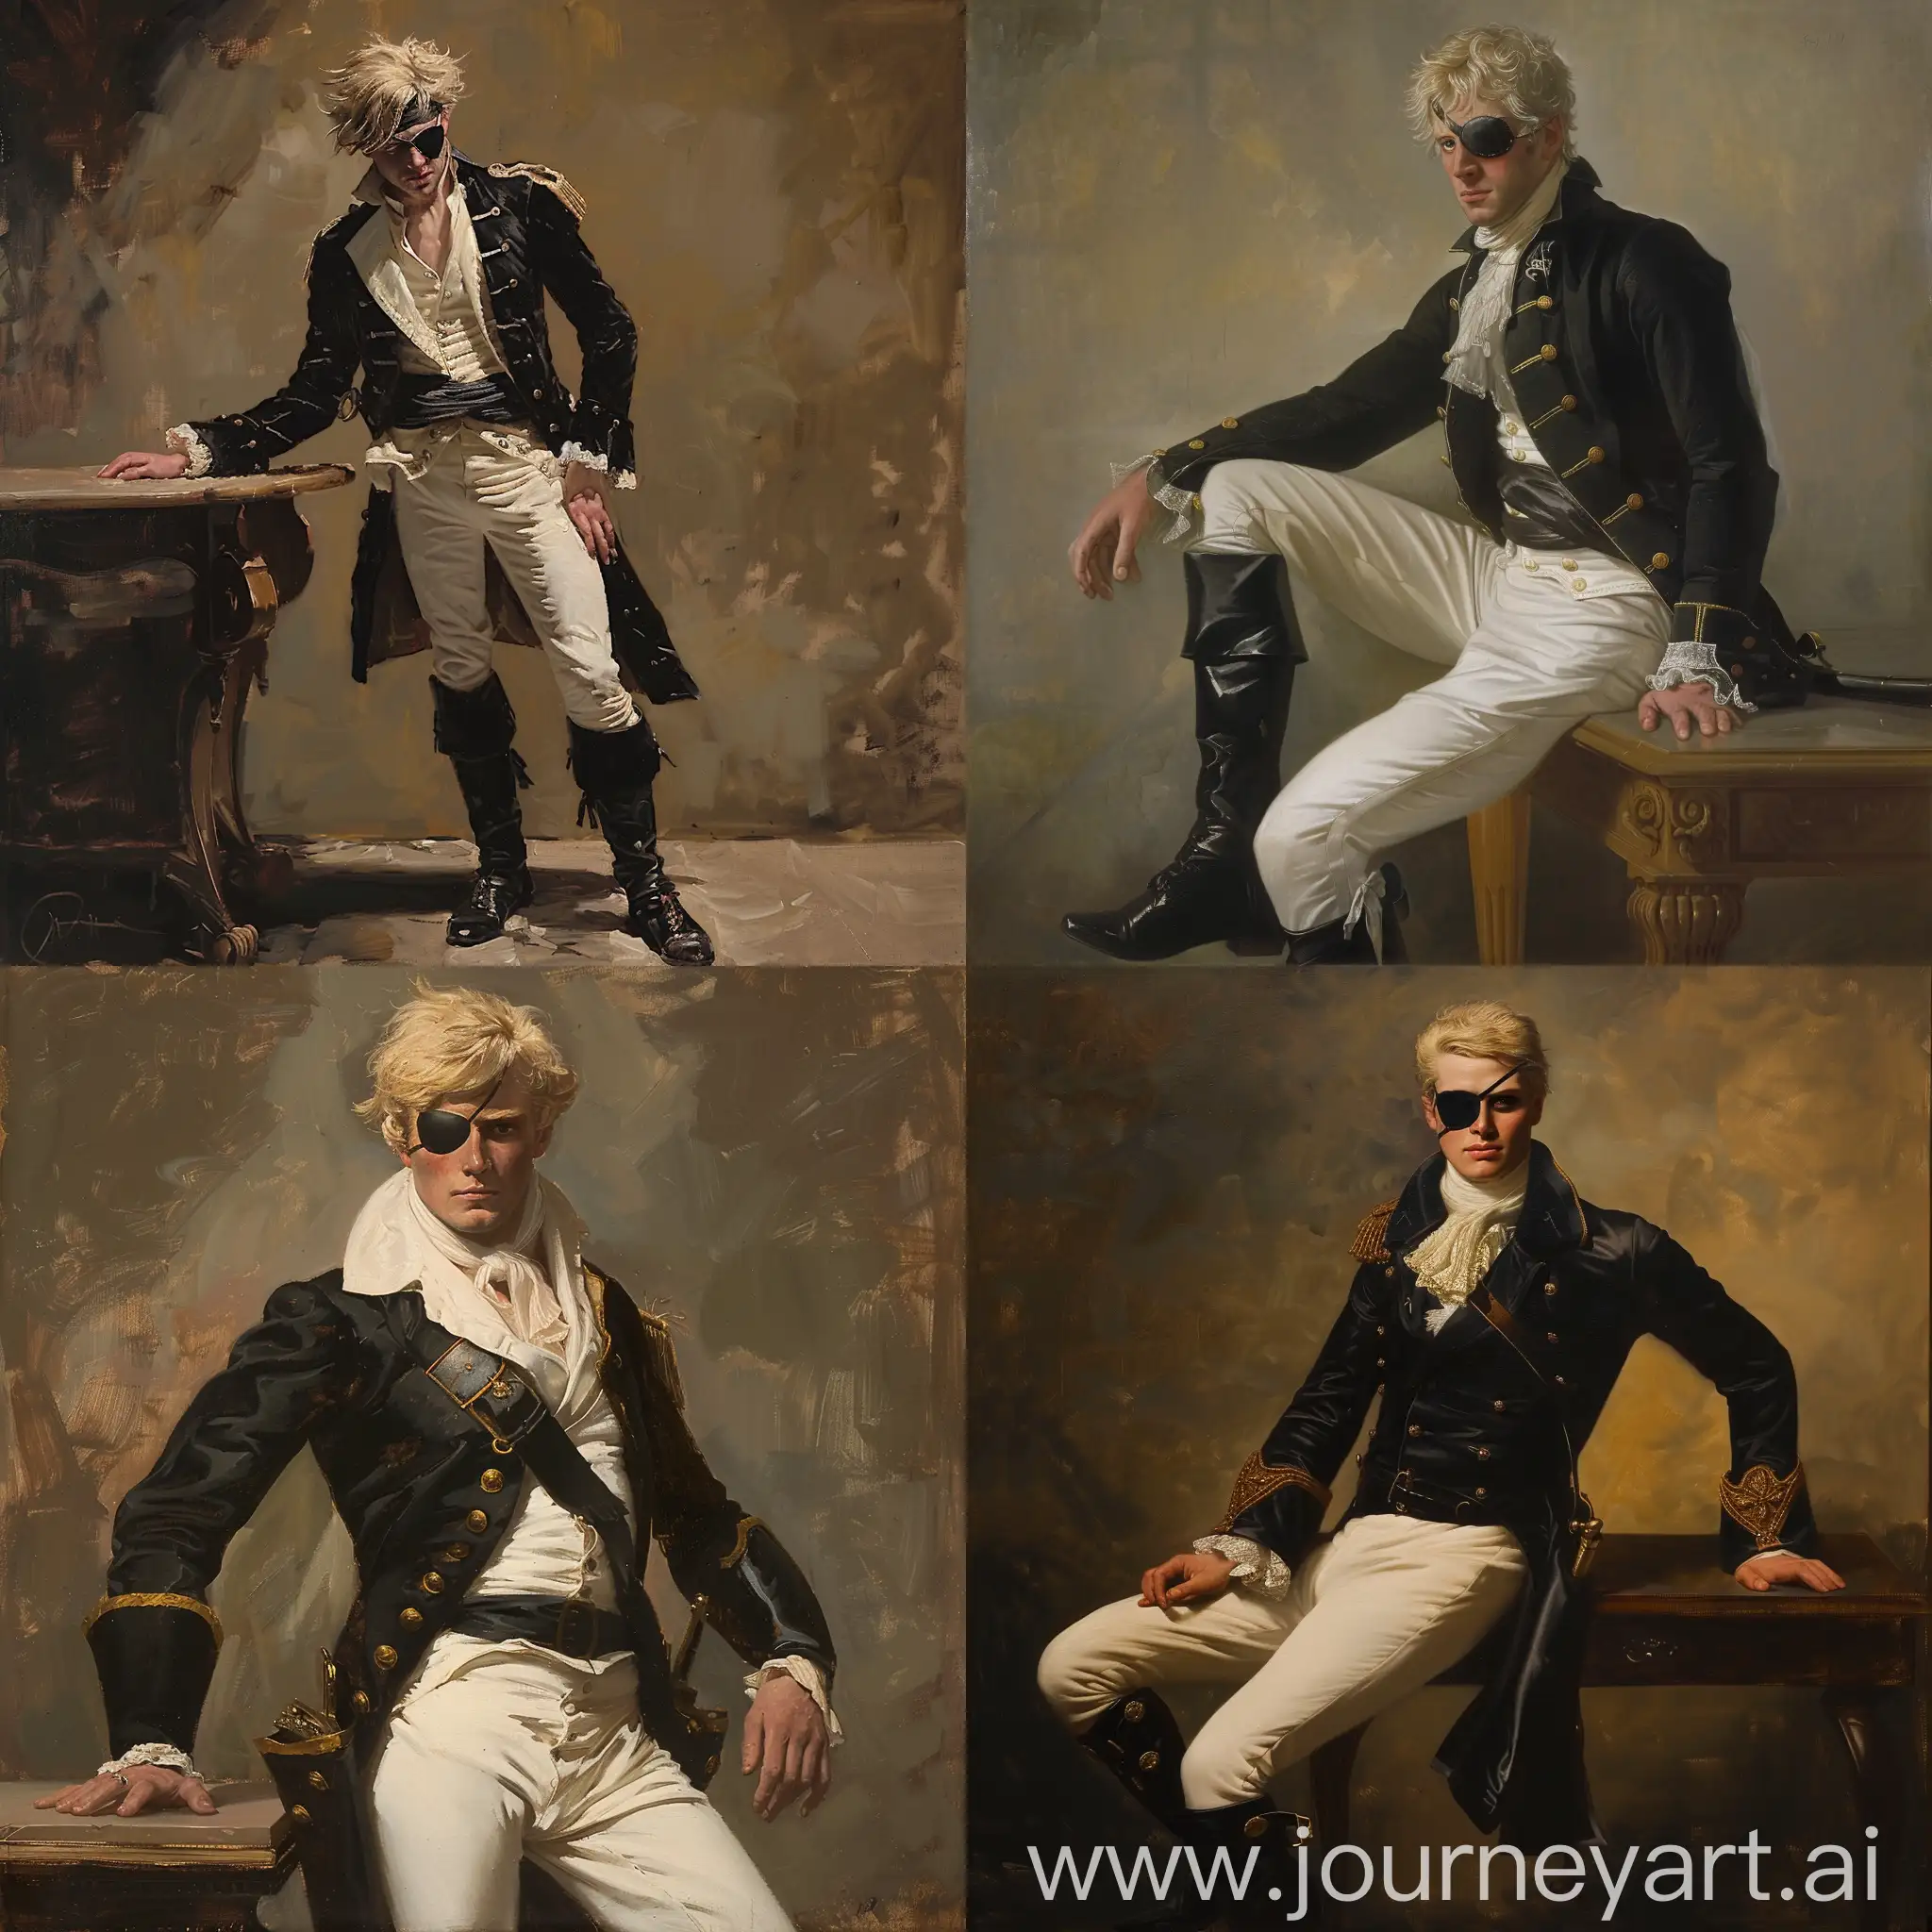 Napoleonic-Oil-Painting-White-Blonde-Male-Figure-with-Eyepatch-and-Black-Tailcoat